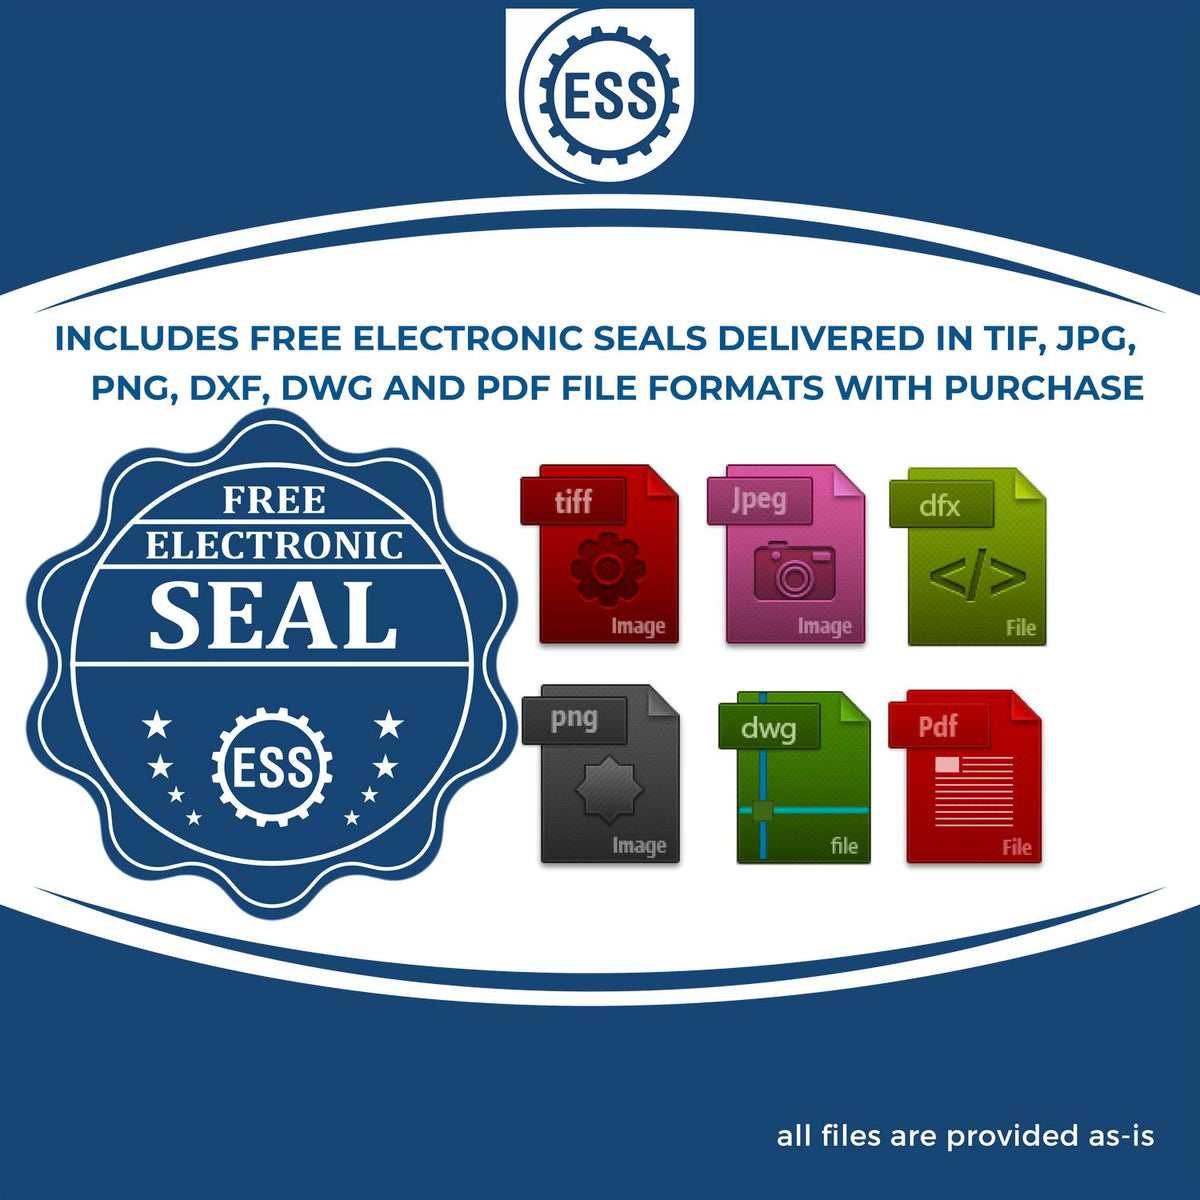 An infographic for the free electronic seal for the PSI Virginia Notary Stamp illustrating the different file type icons such as DXF, DWG, TIF, JPG and PNG.